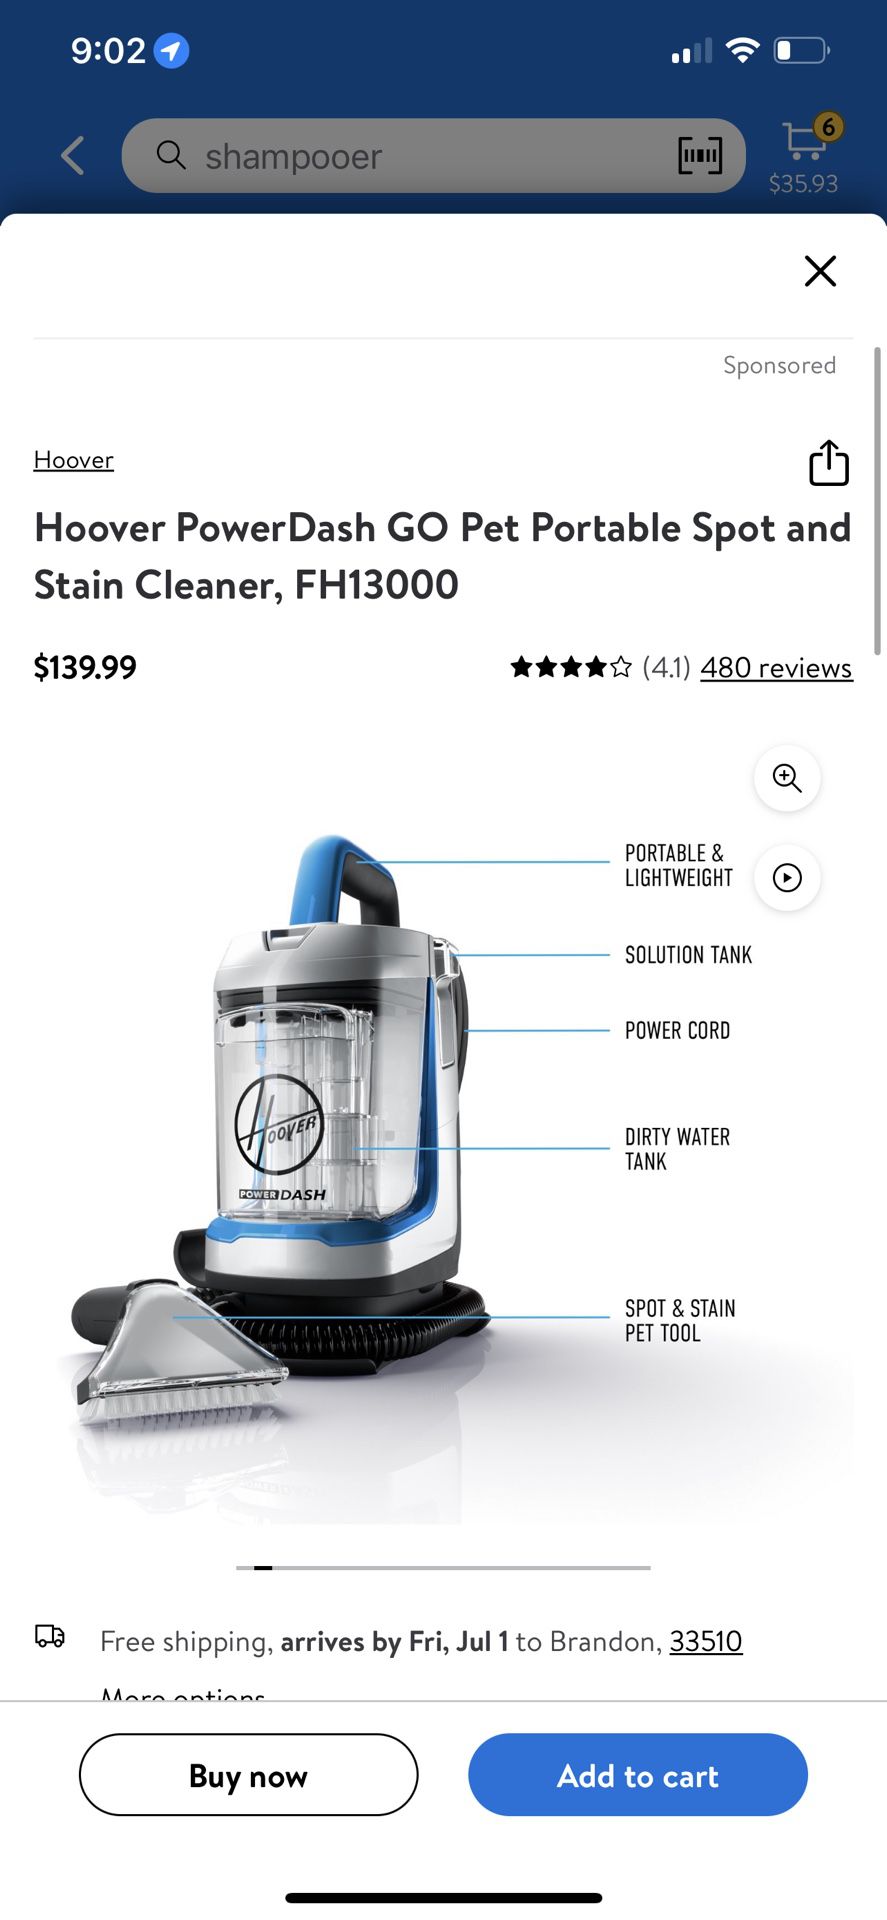 Hoover PowerDash GO Stain Cleaner